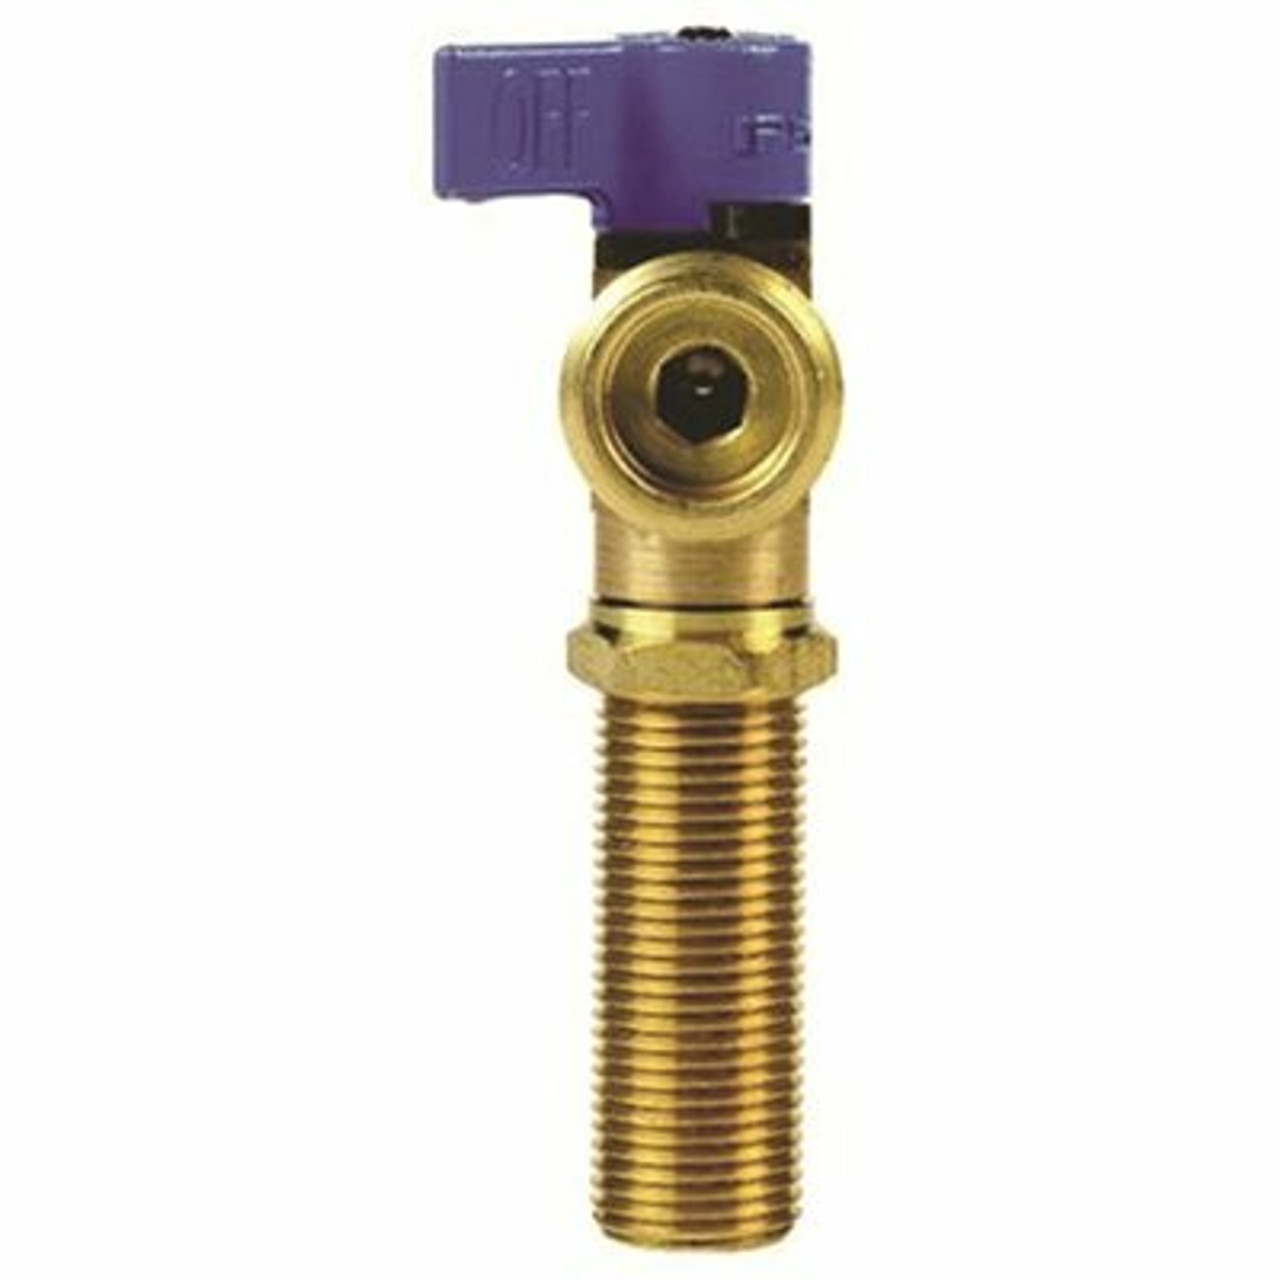 Ips Corporation Water-Tite 88251 Brass Quarter-Turn Valve For Washing Machine Outlet Boxes, 1/2-Inch Cpvc, Blue Handle